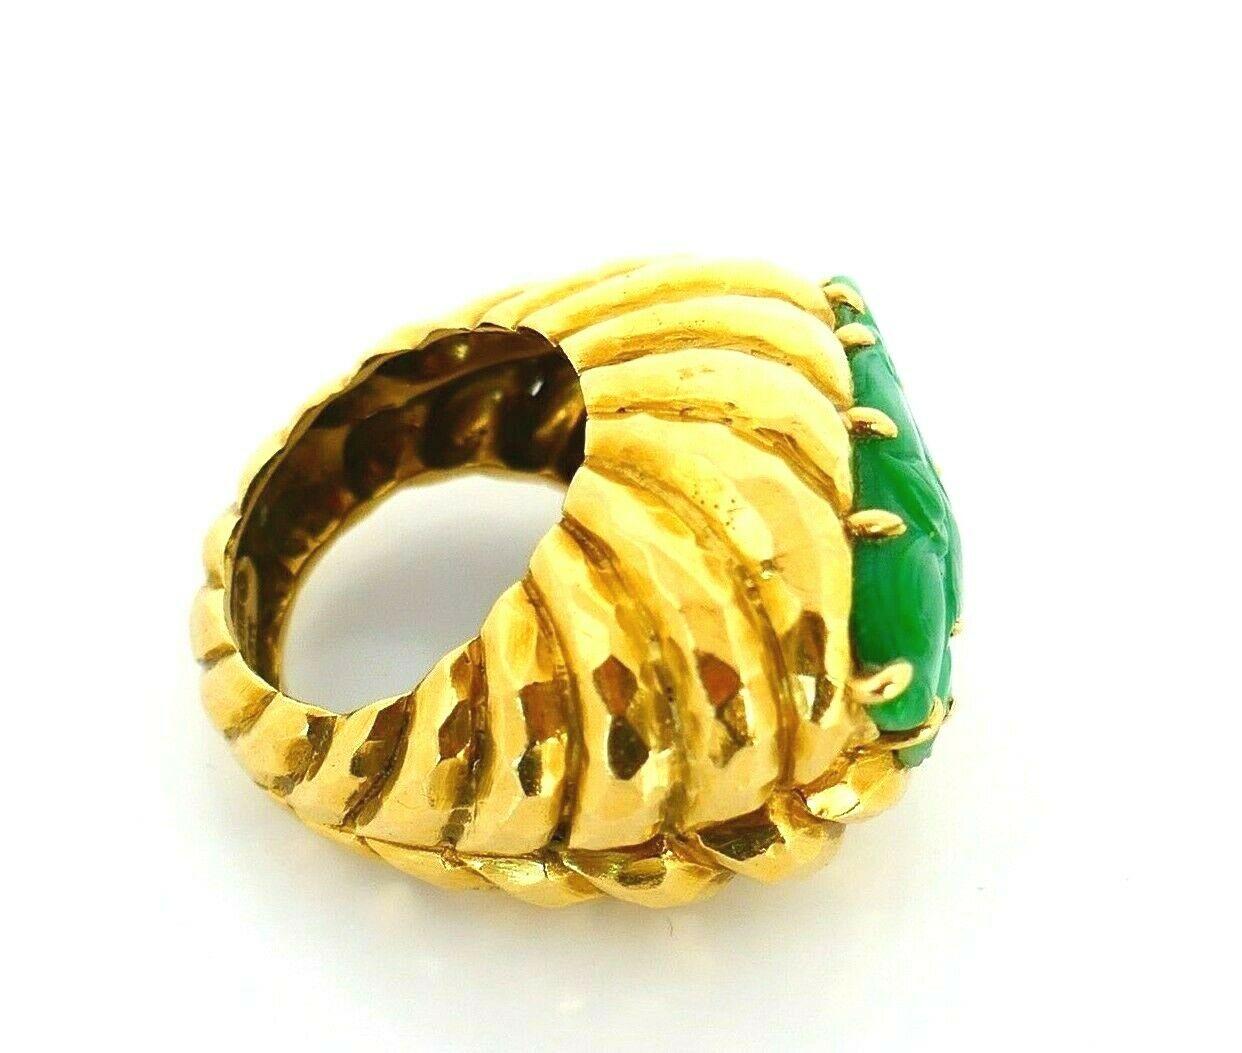 18k yellow hammered gold carved jade ring signed by David Webb, circa 1970s. 
The stone has a delicate leafy design underlining a massive look of the ring.
The ring size is 7. Stamped with the David Webb maker's mark and a hallmark for 18k